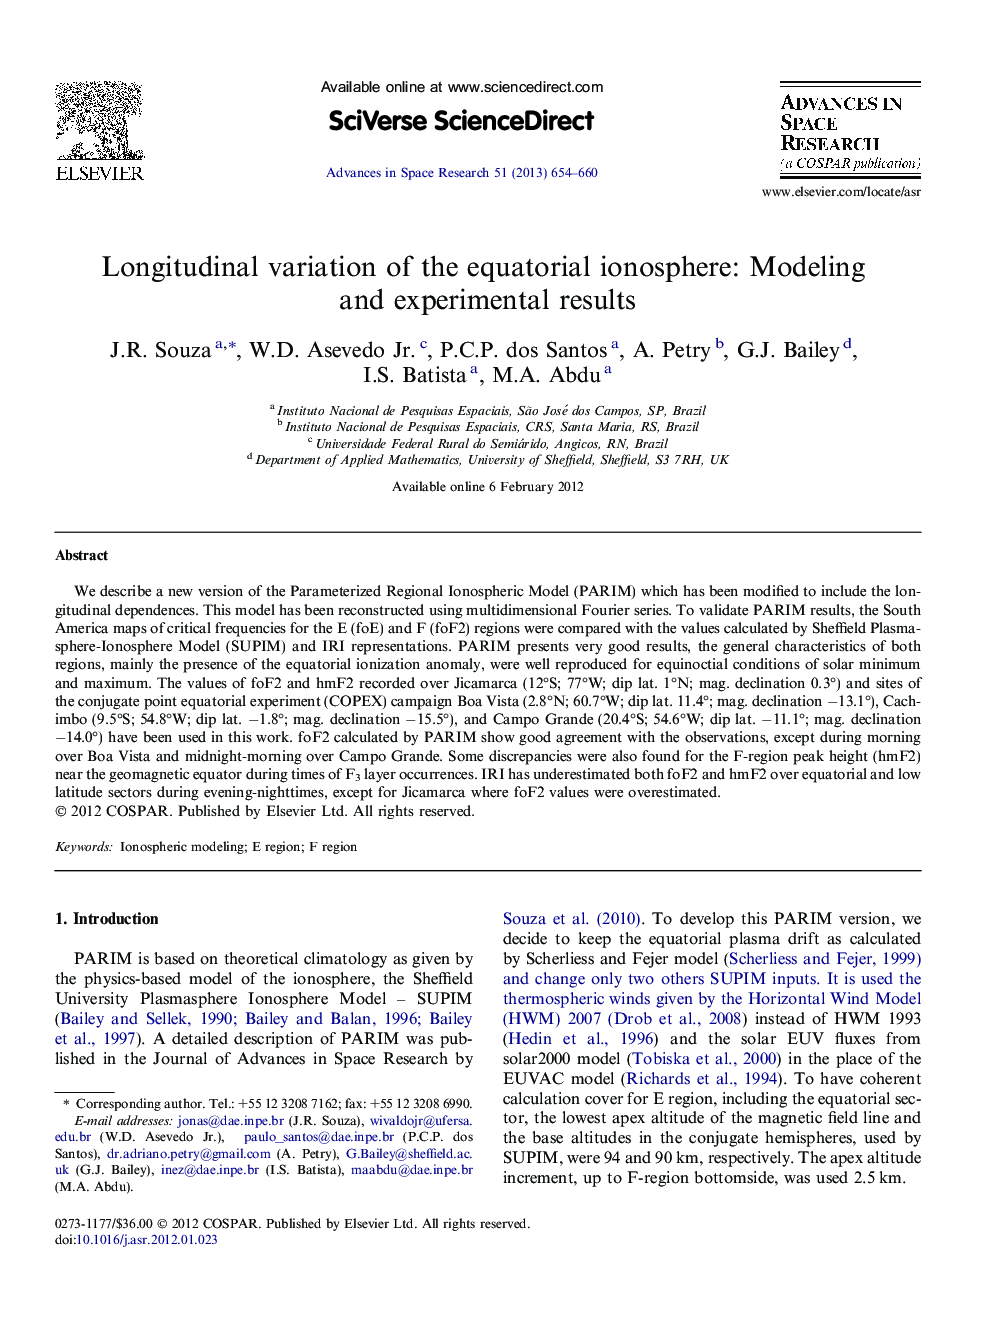 Longitudinal variation of the equatorial ionosphere: Modeling and experimental results